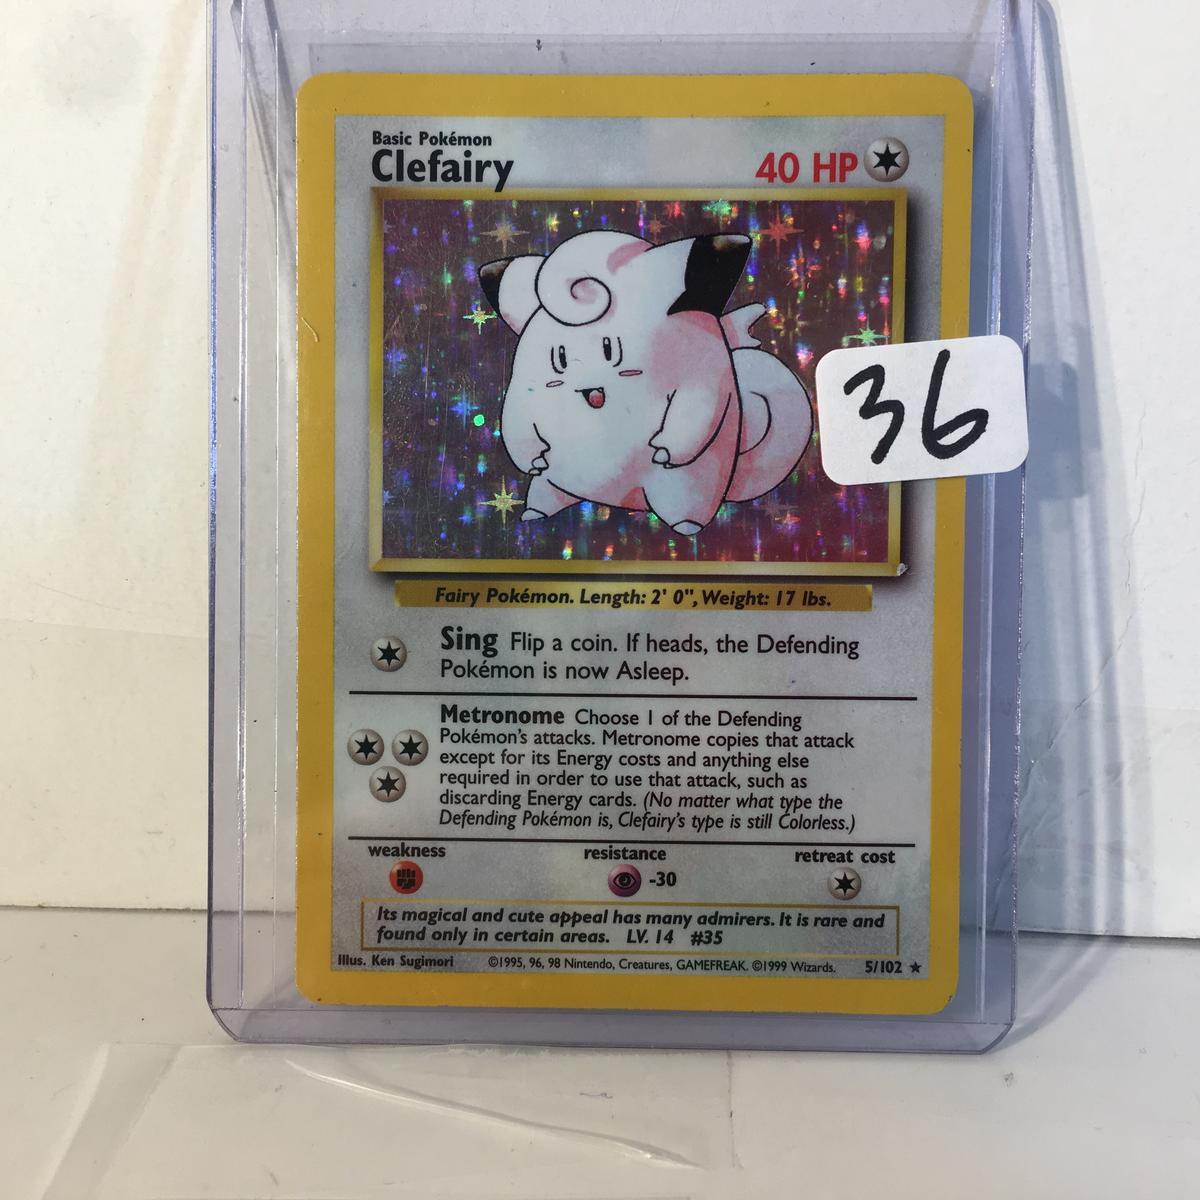 Collector 1999 Wizards Pokemon TCG Basic Clefairy HP40 Pokemon Trading Card Game 5/102